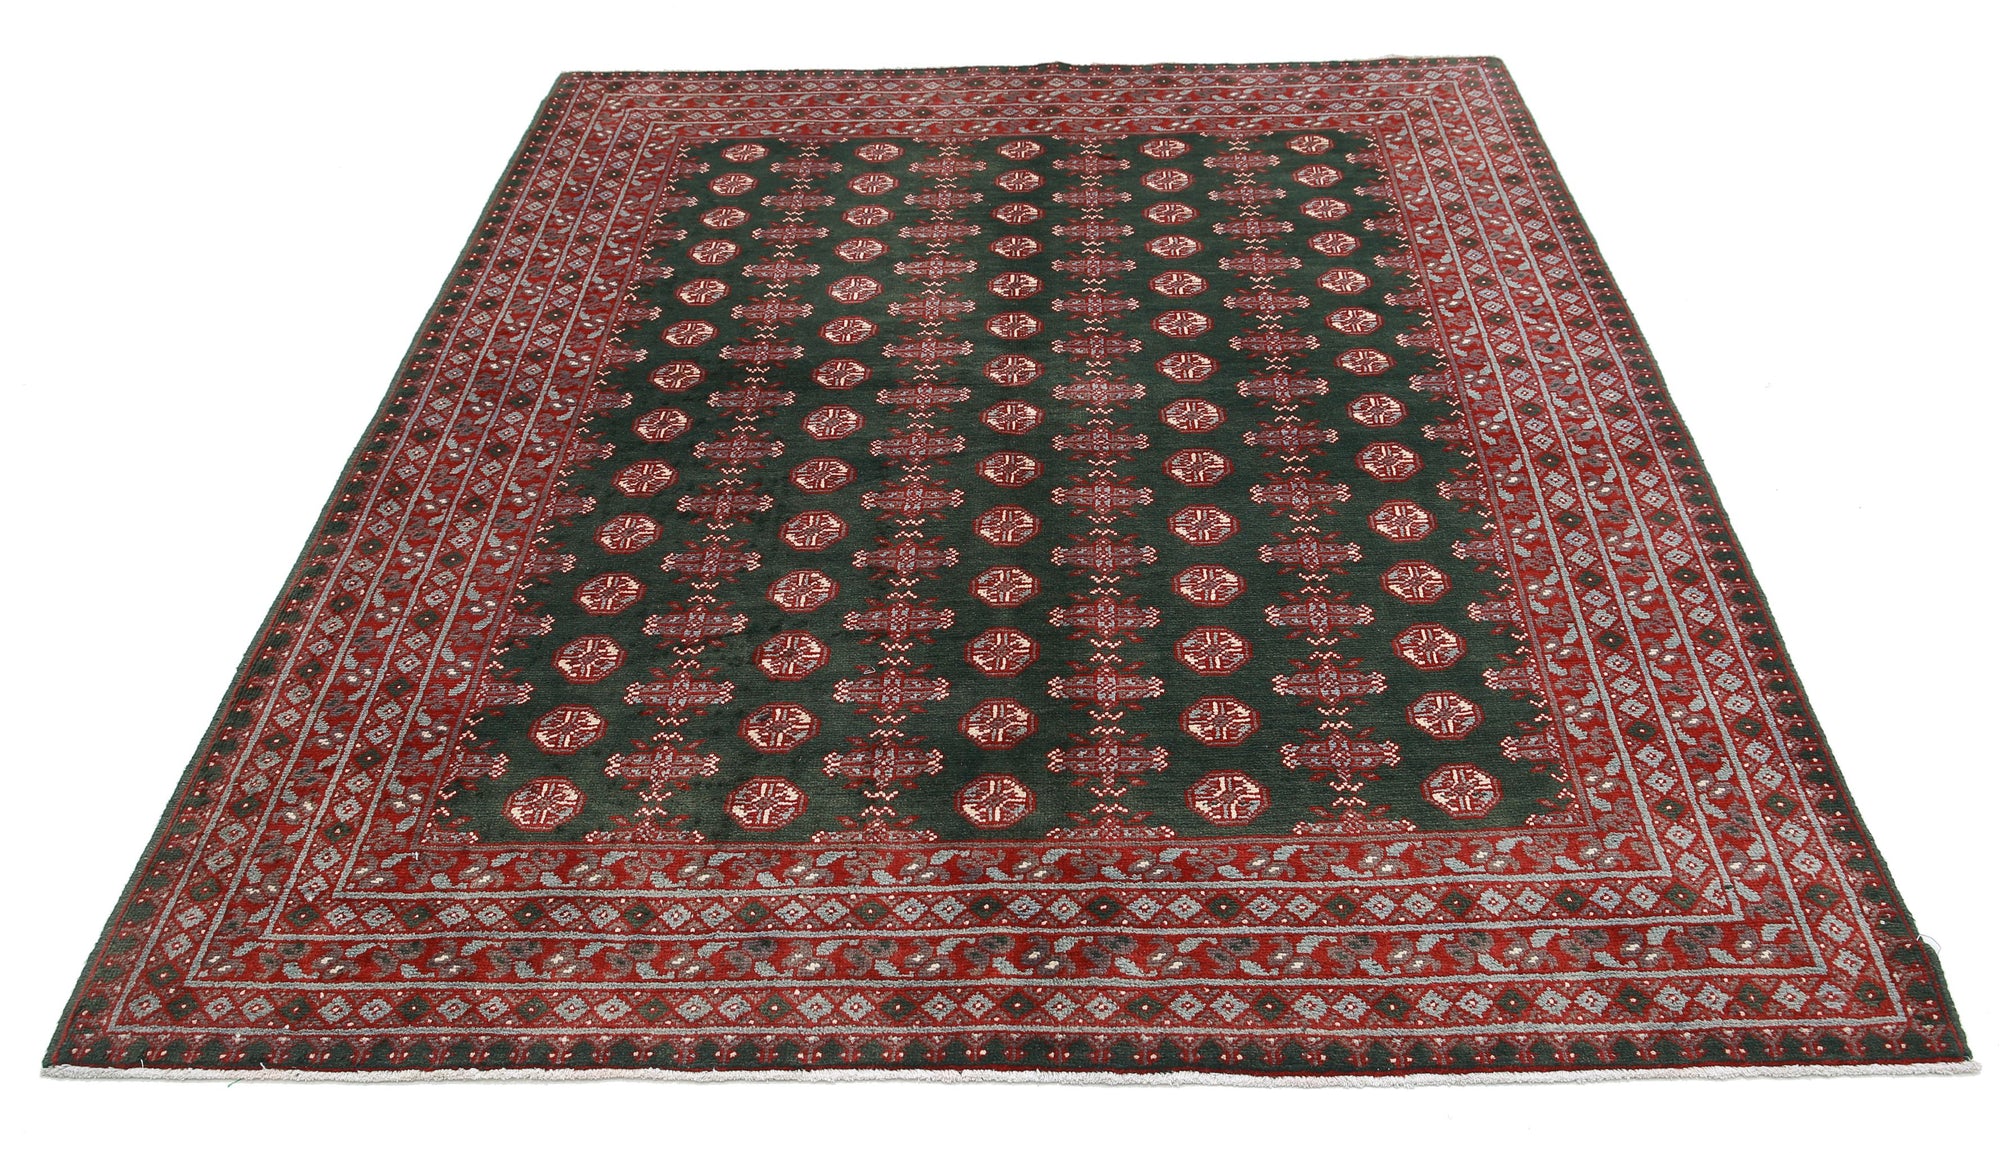 Revival-hand-knotted-gul-collection-wool-rug-5013947-3.jpg